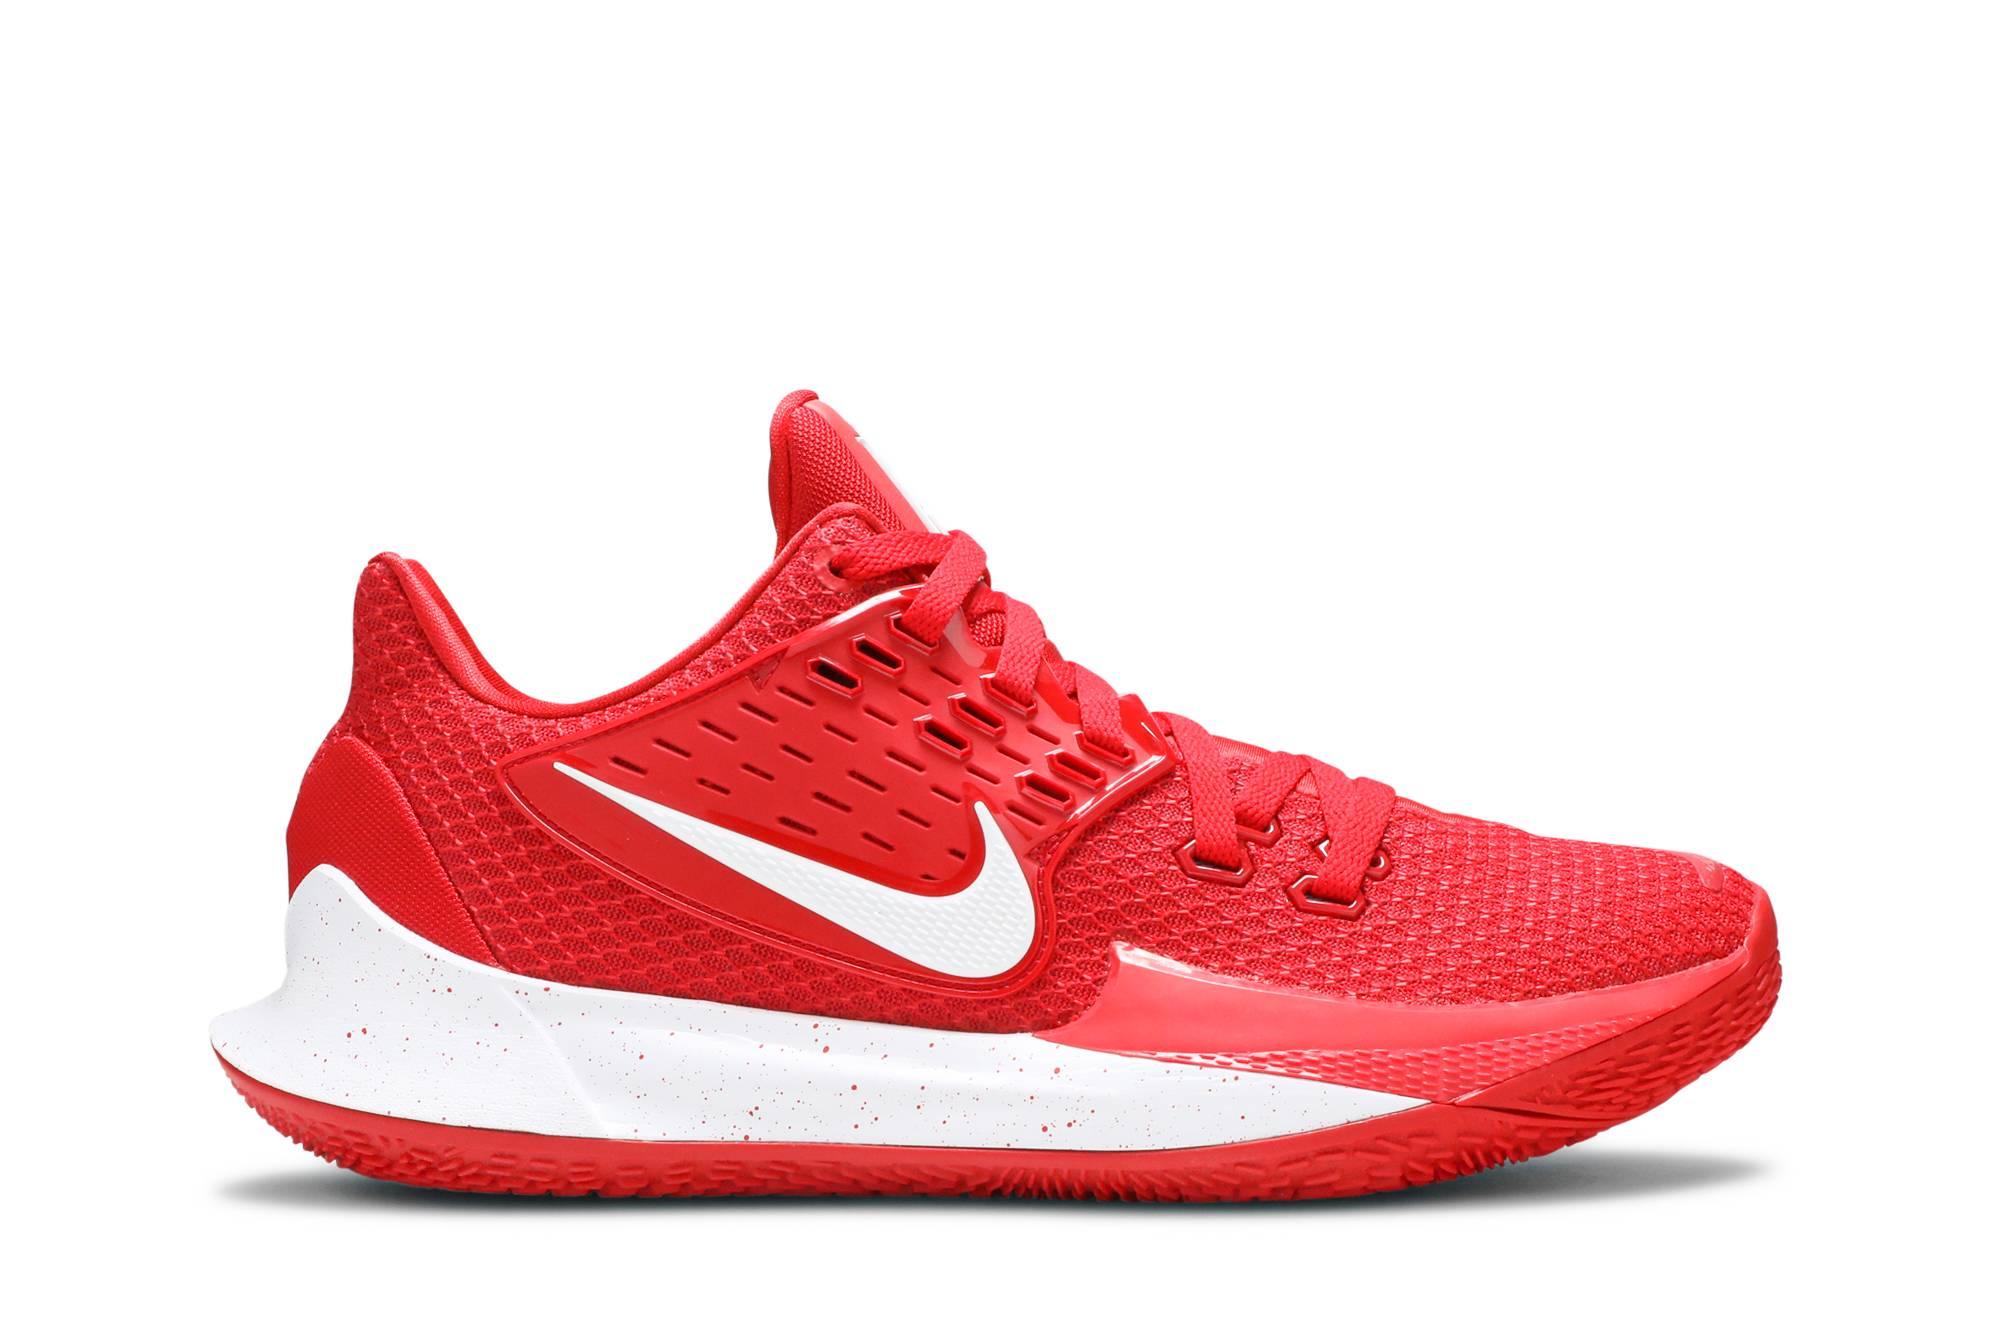 Nike Kyrie Low 2 in University Red 